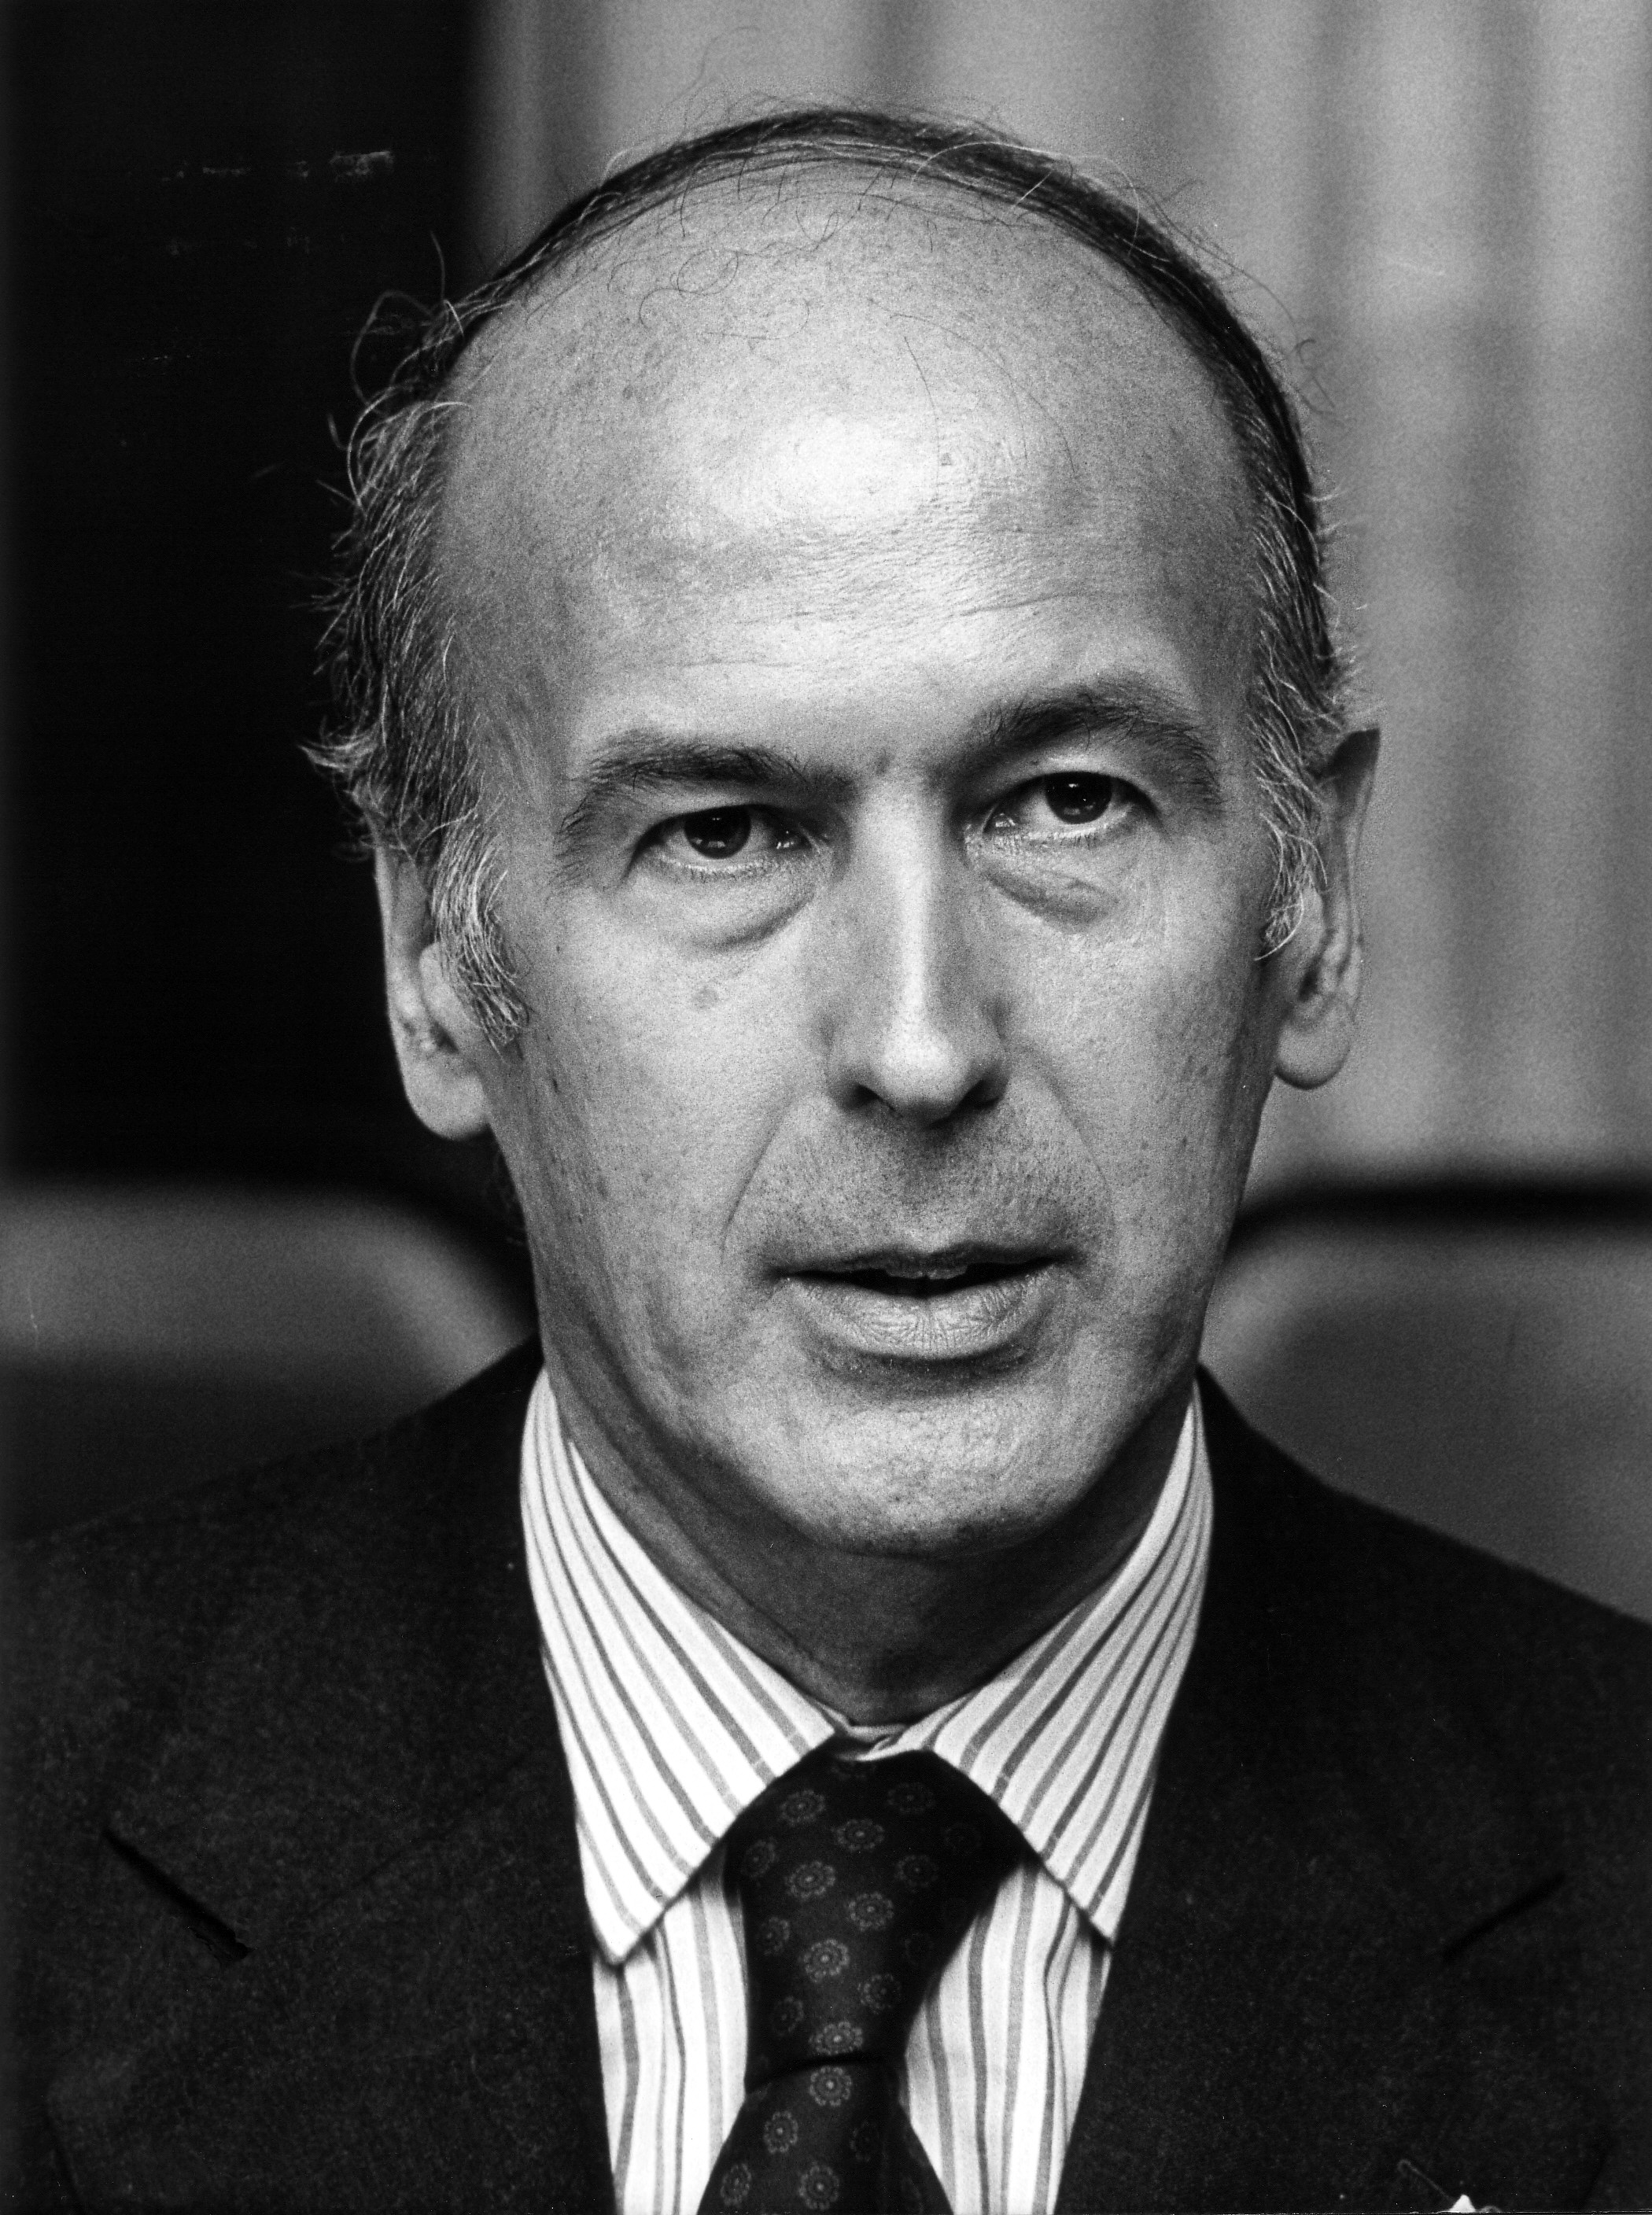 Giscard d'Estaing in 1975